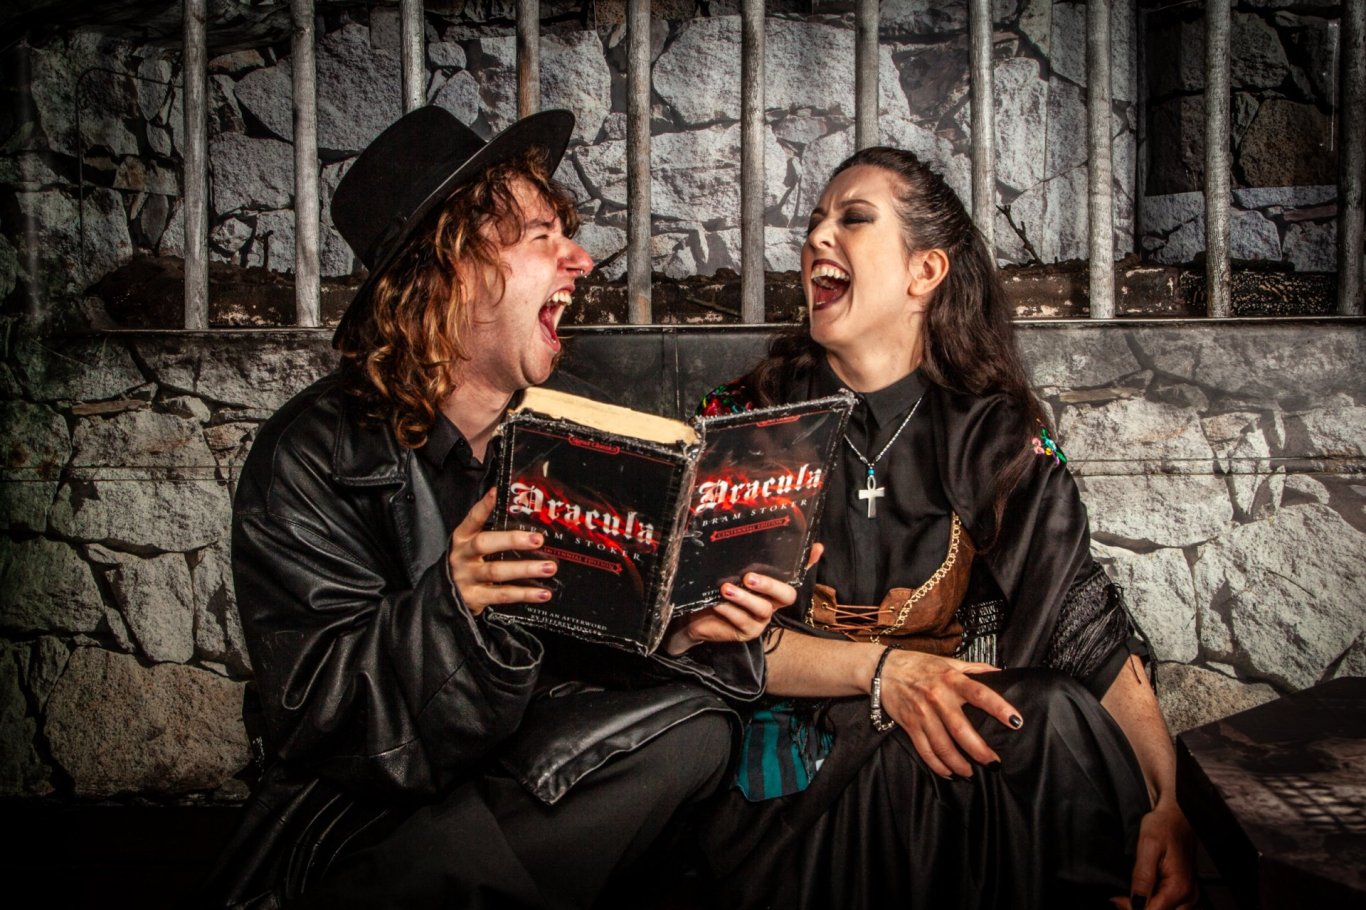 man and woman laughing while holding dracula book